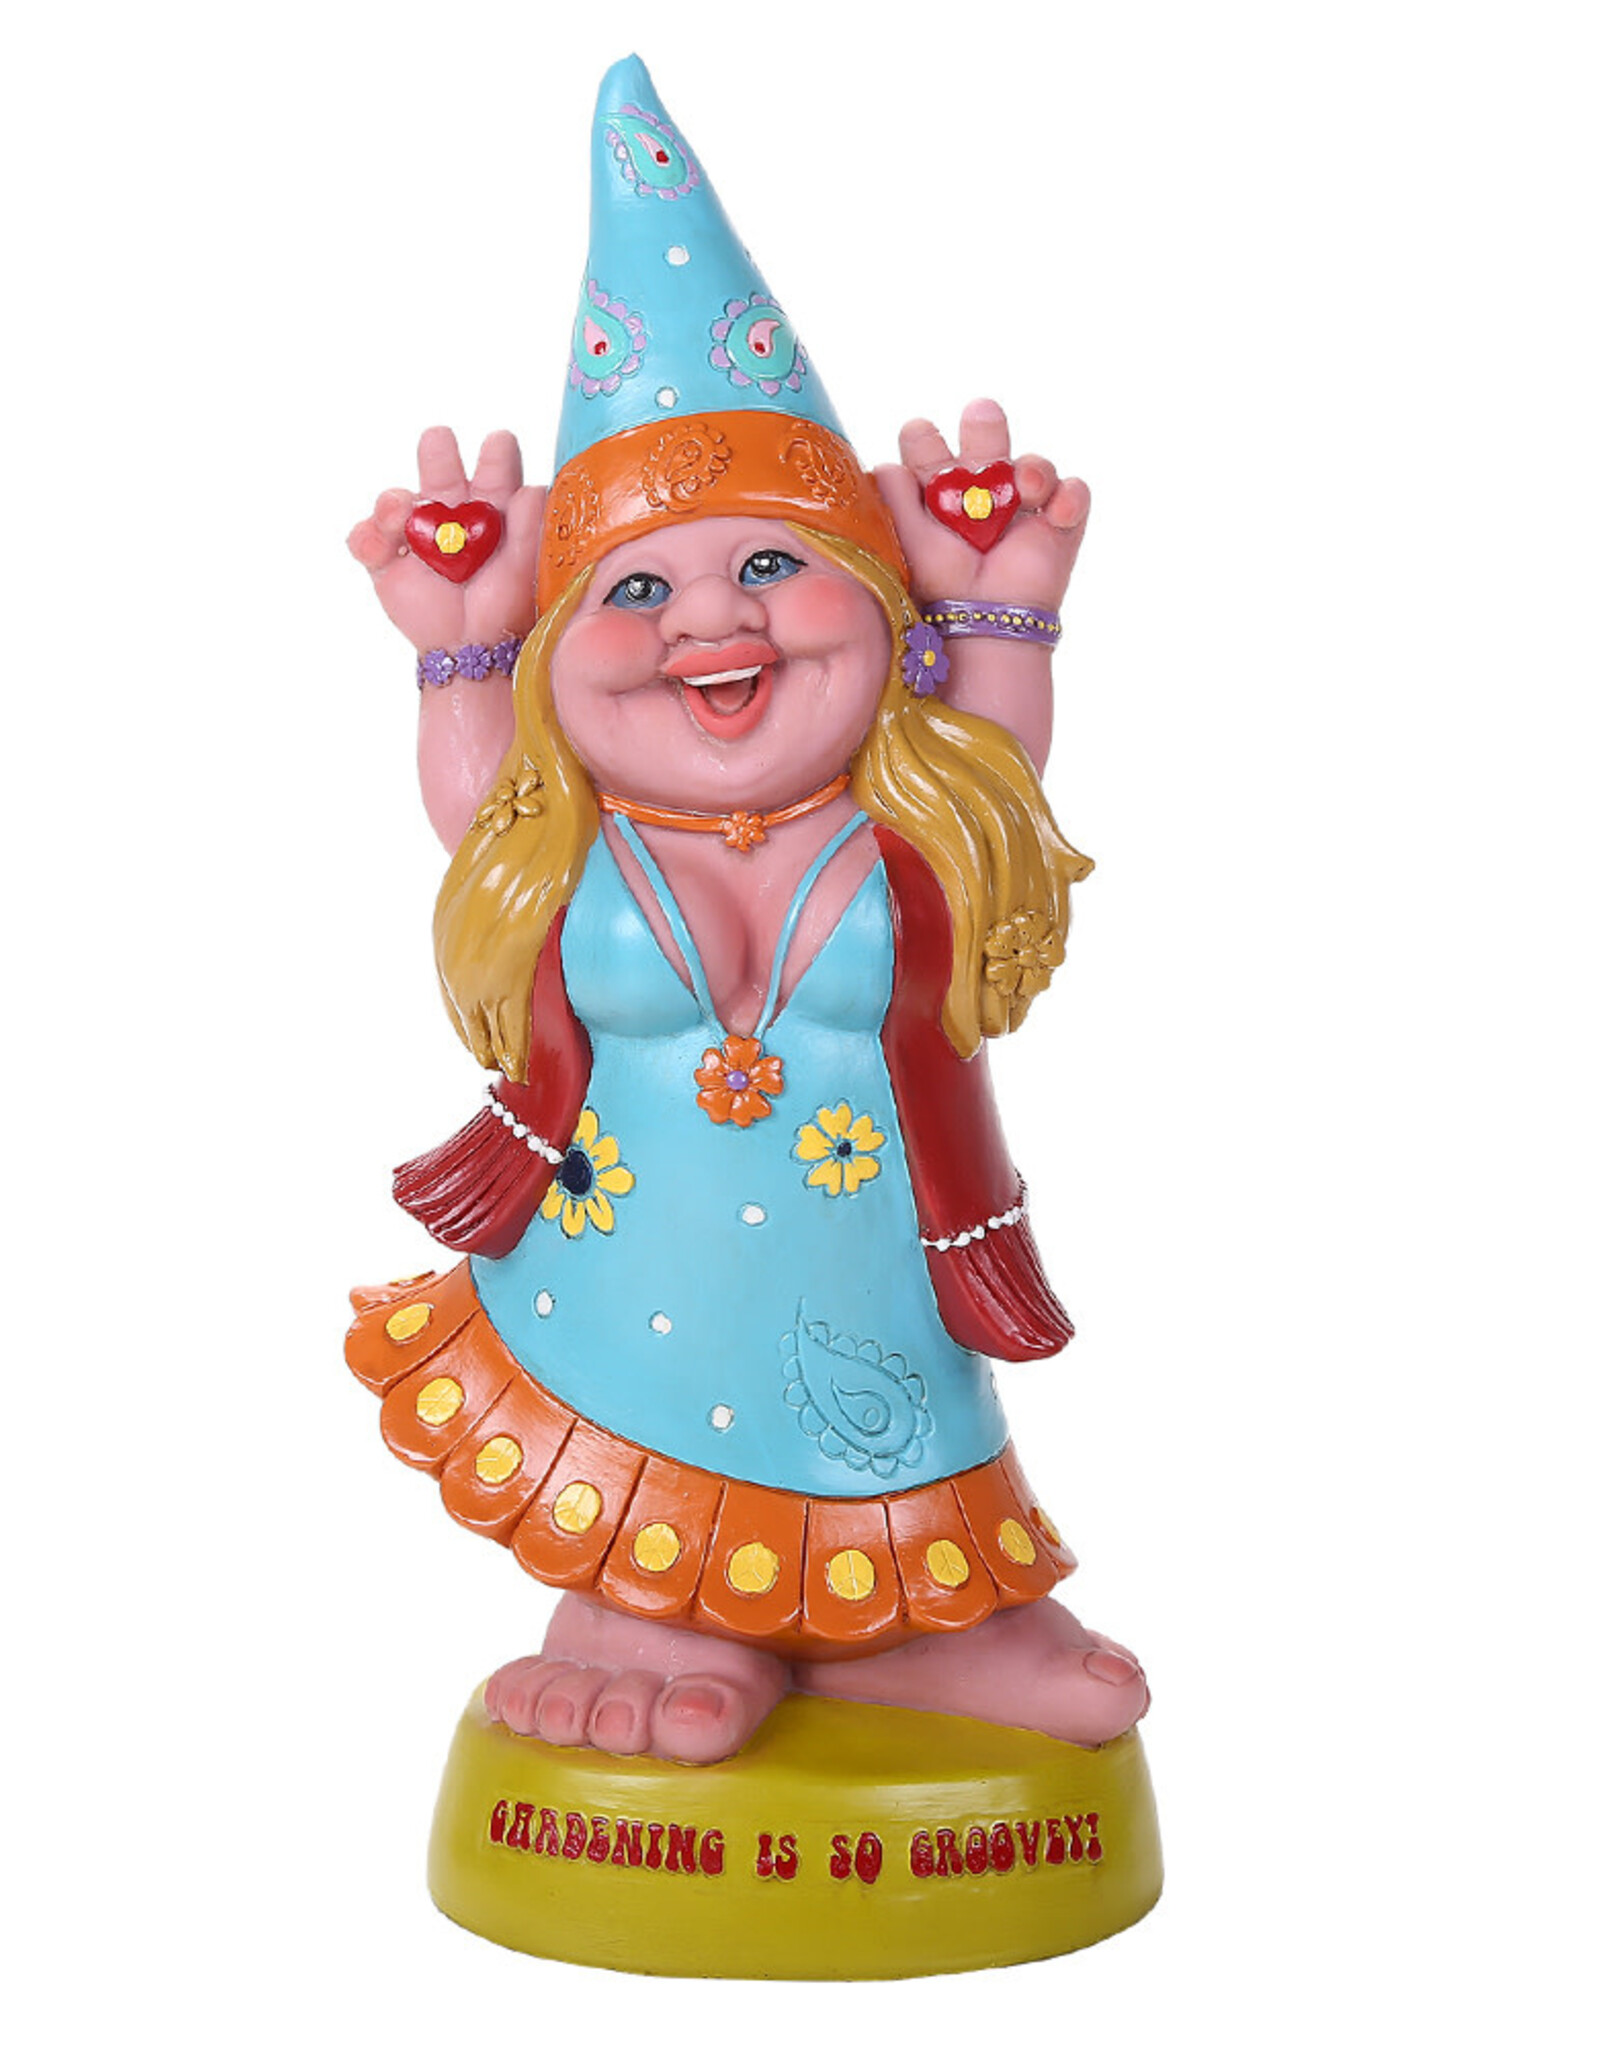 Groovy Lady Gnome